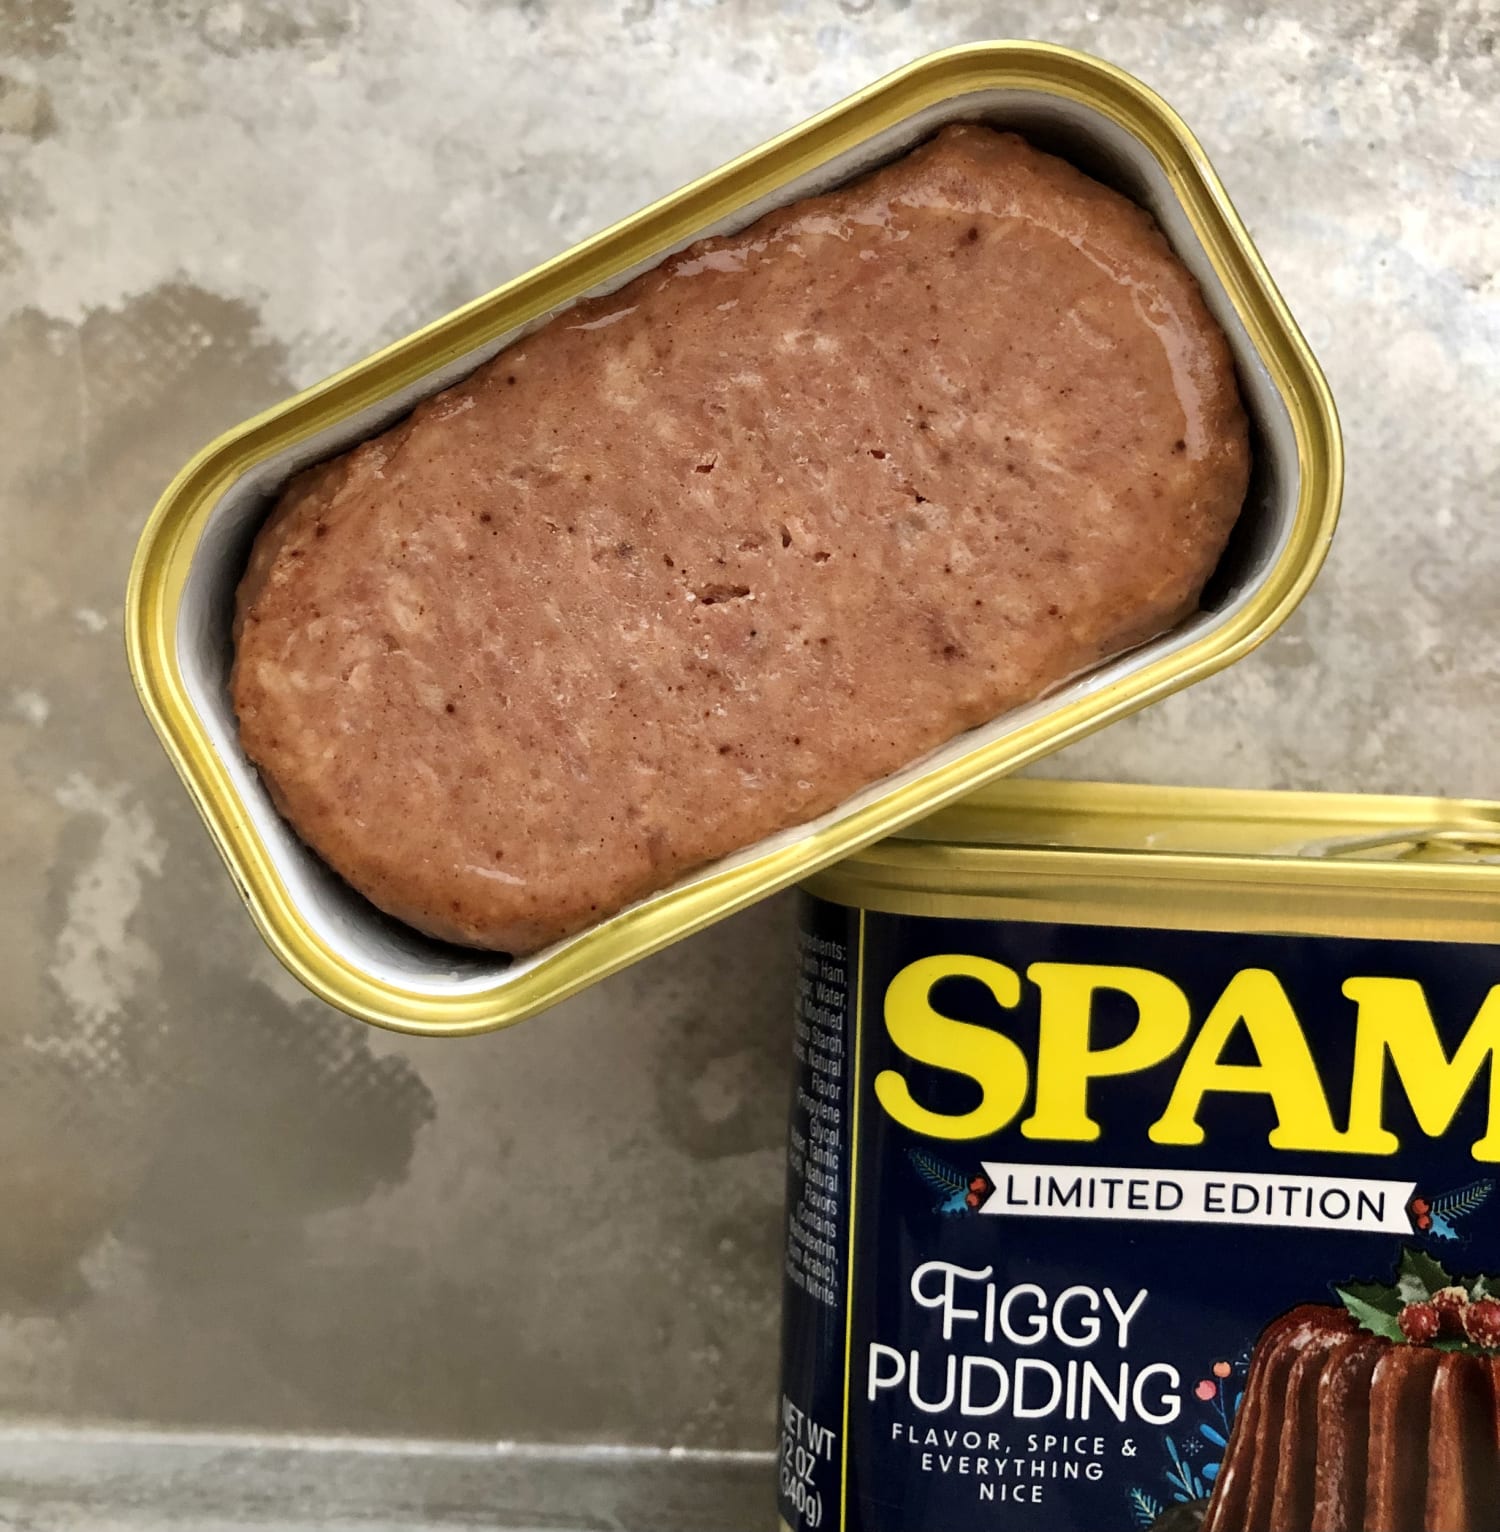 Limited Edition Figgy Pudding Spam – I tried it, so you don't have to